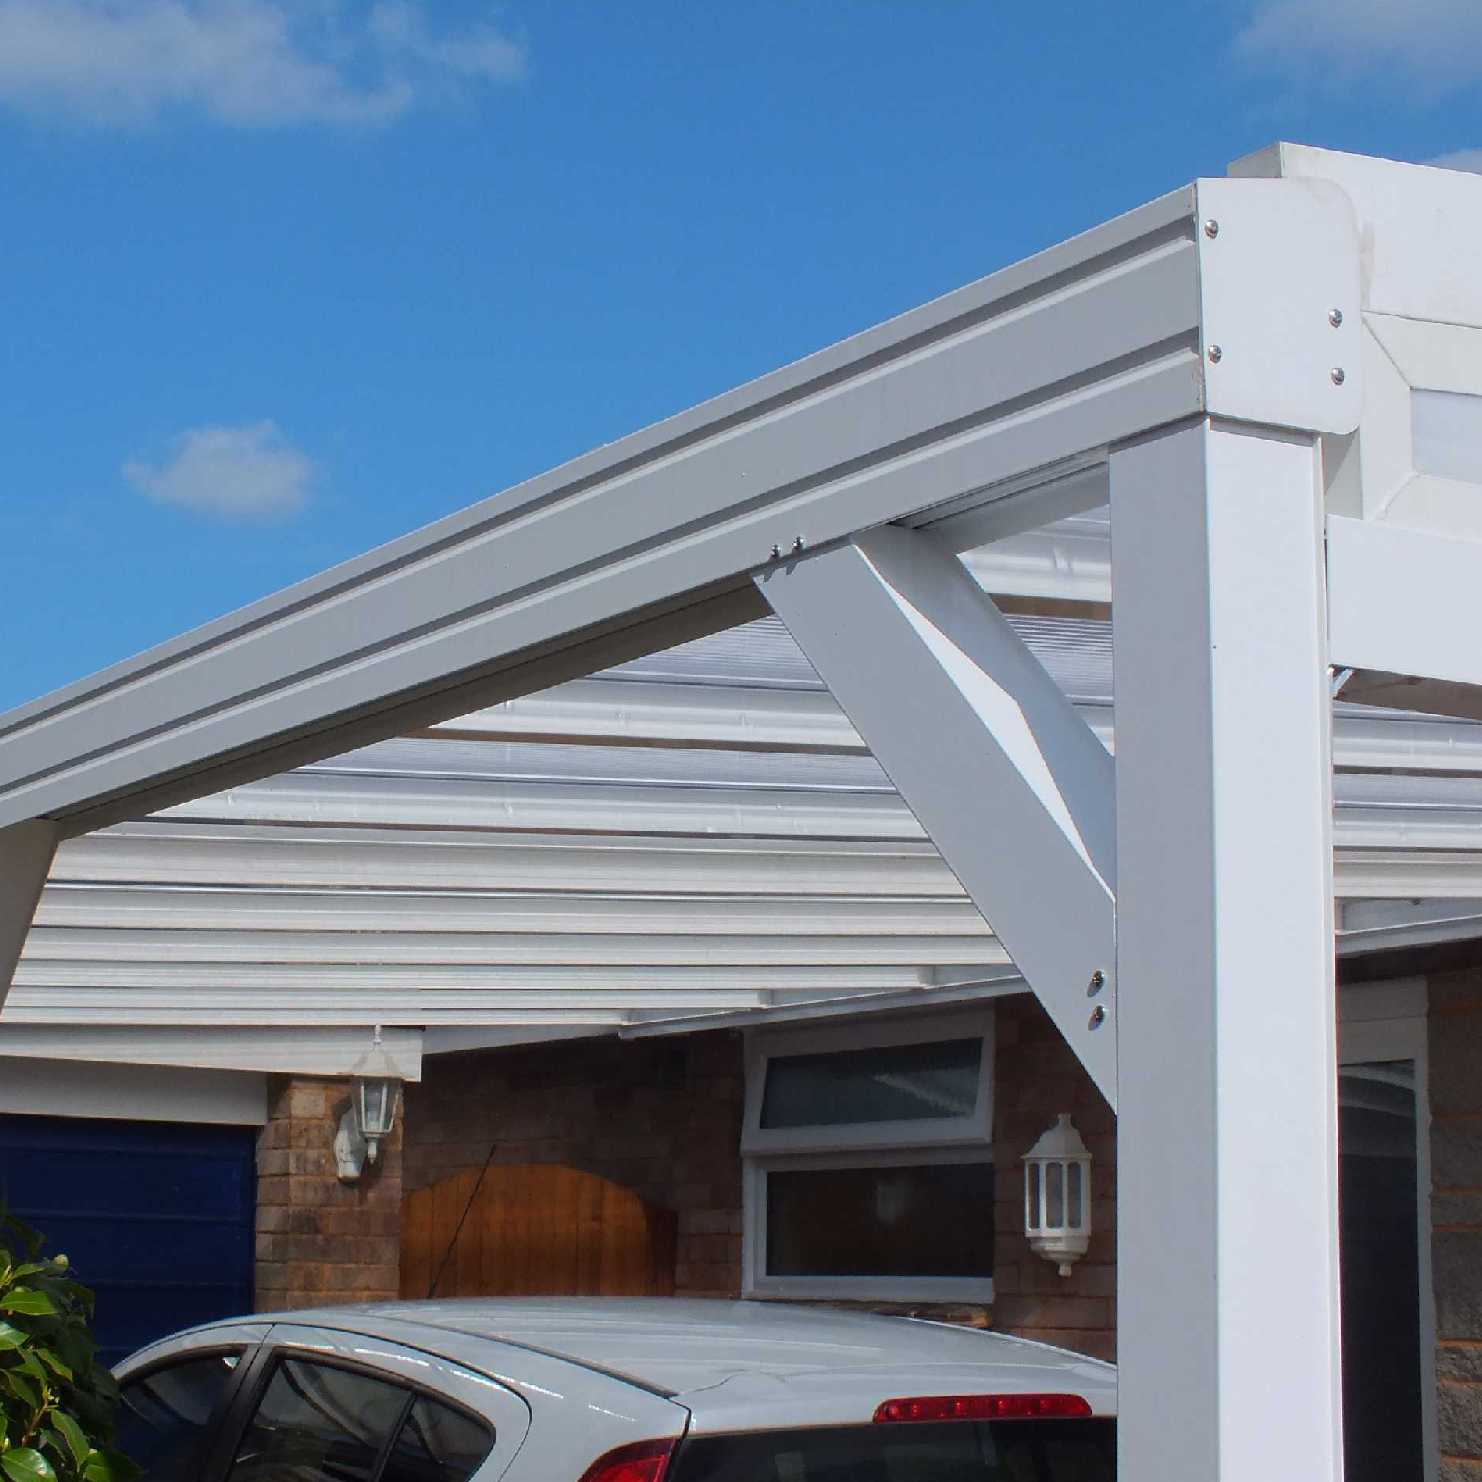 Buy Omega Smart Lean-To Canopy, White with 16mm Polycarbonate Glazing - 4.2m (W) x 1.5m (P), (3) Supporting Posts online today